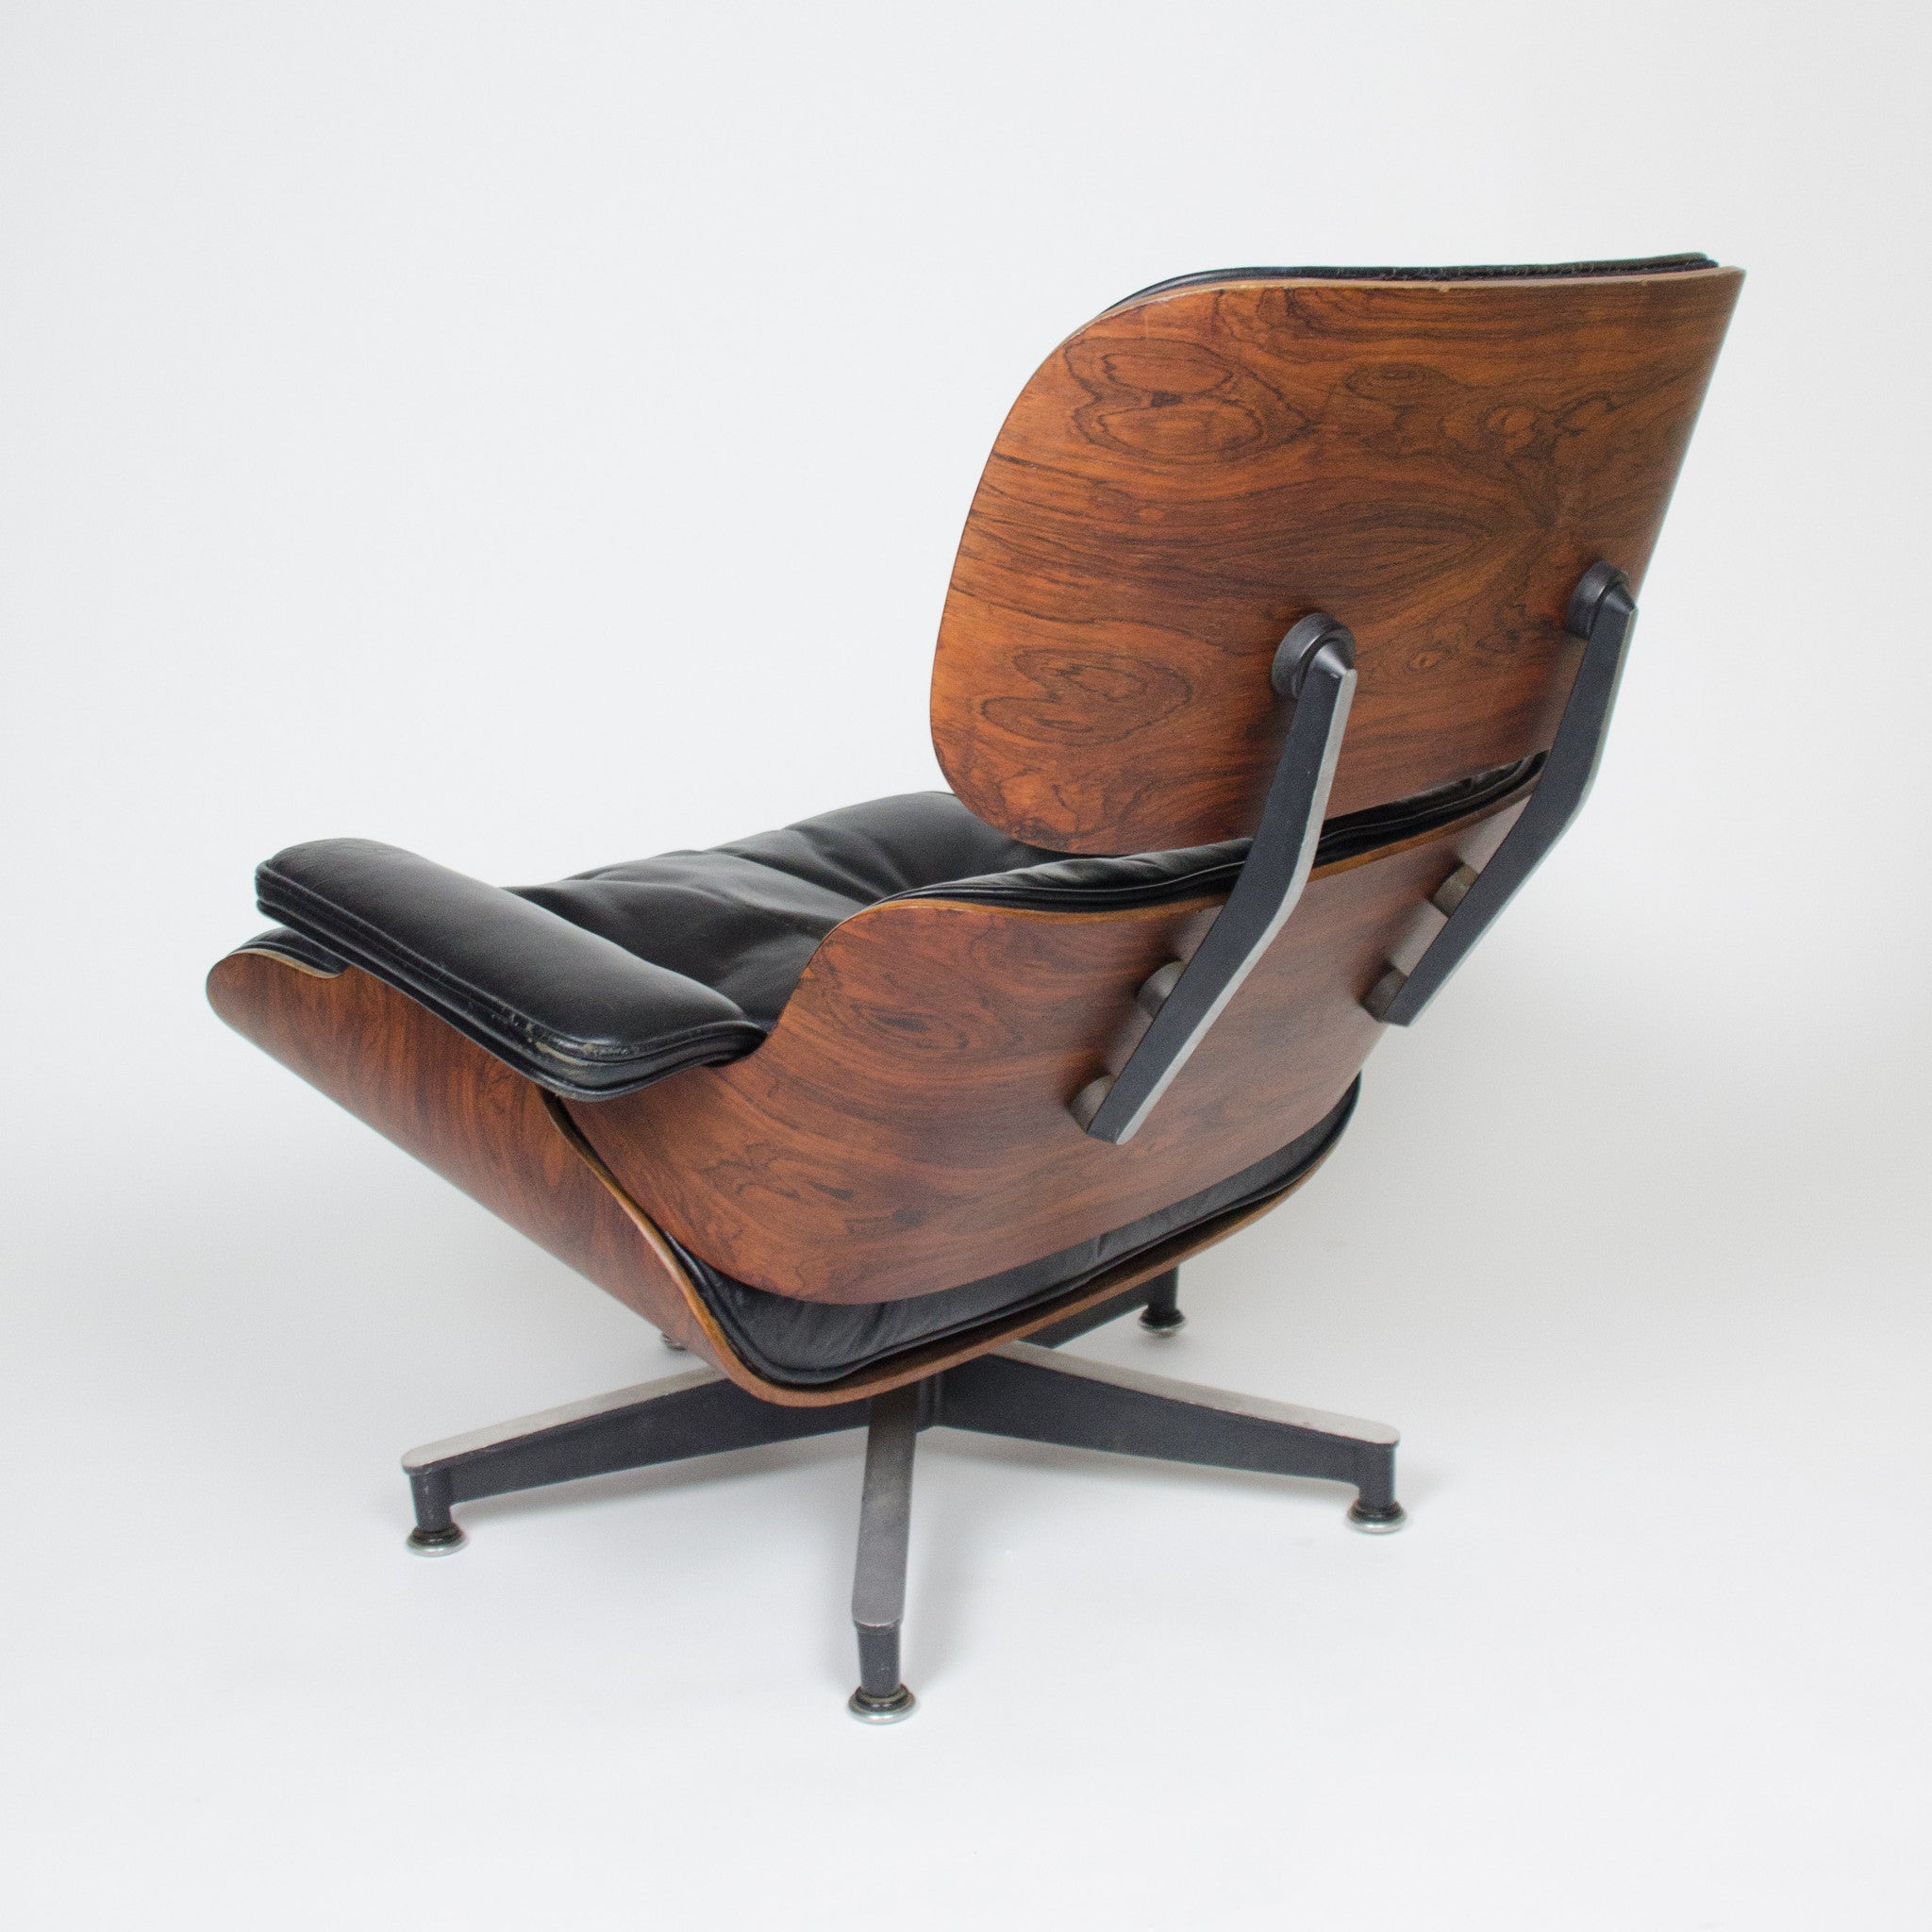 SOLD Holy Grail 1956 Herman Miller Eames Lounge Chair With Swivel Ottoman